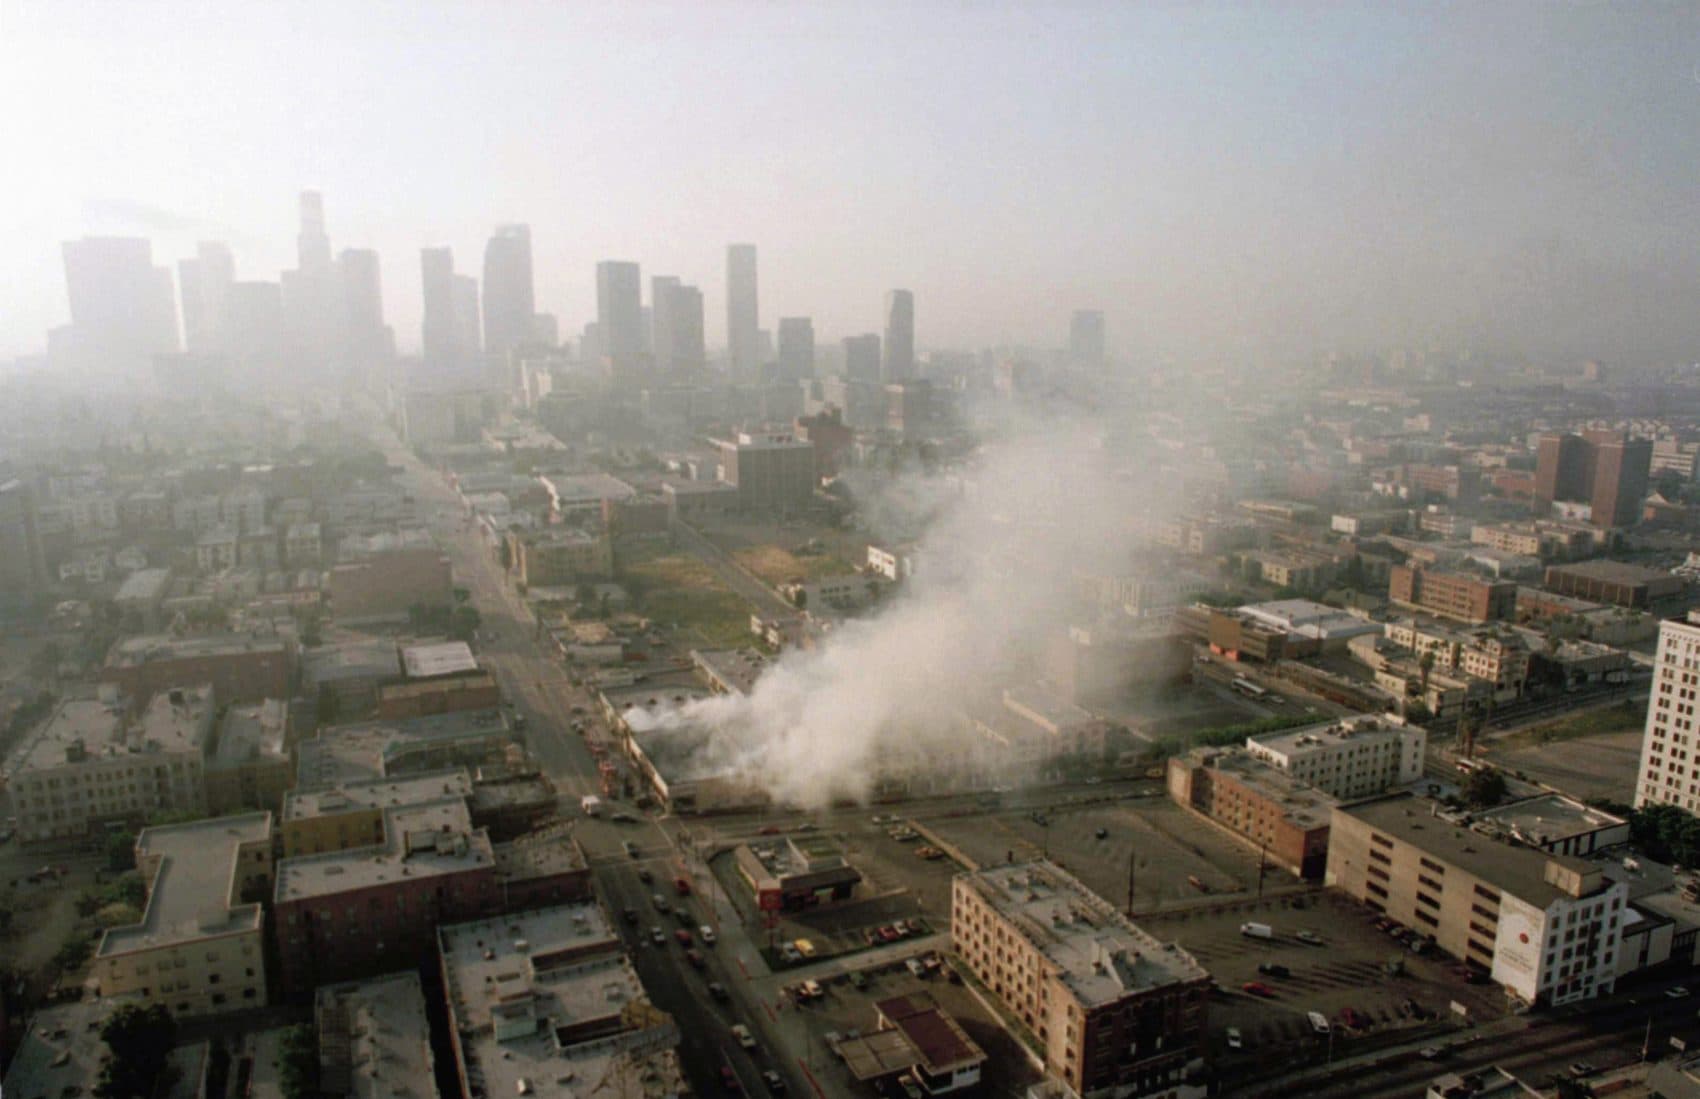 Smoke rises from a shopping center burned by rioters early Thursday morning on April 30, 1992, as the Los Angeles skyline is partially obscured by smoke. (Paul Sakuma/AP)